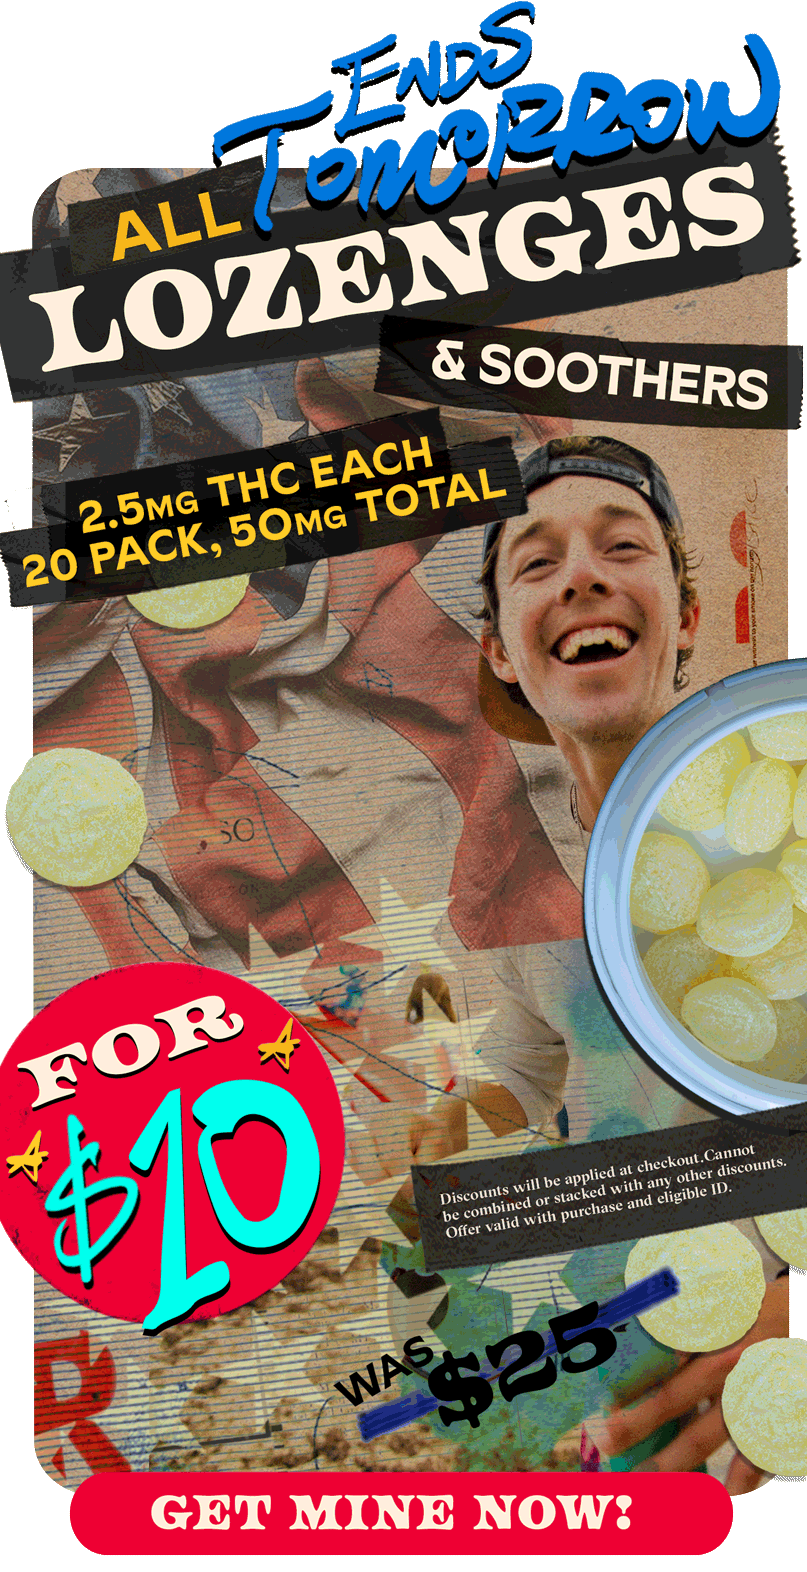 All Lozenges And Soothers Now $10 MemorialDay EndsTomorrow